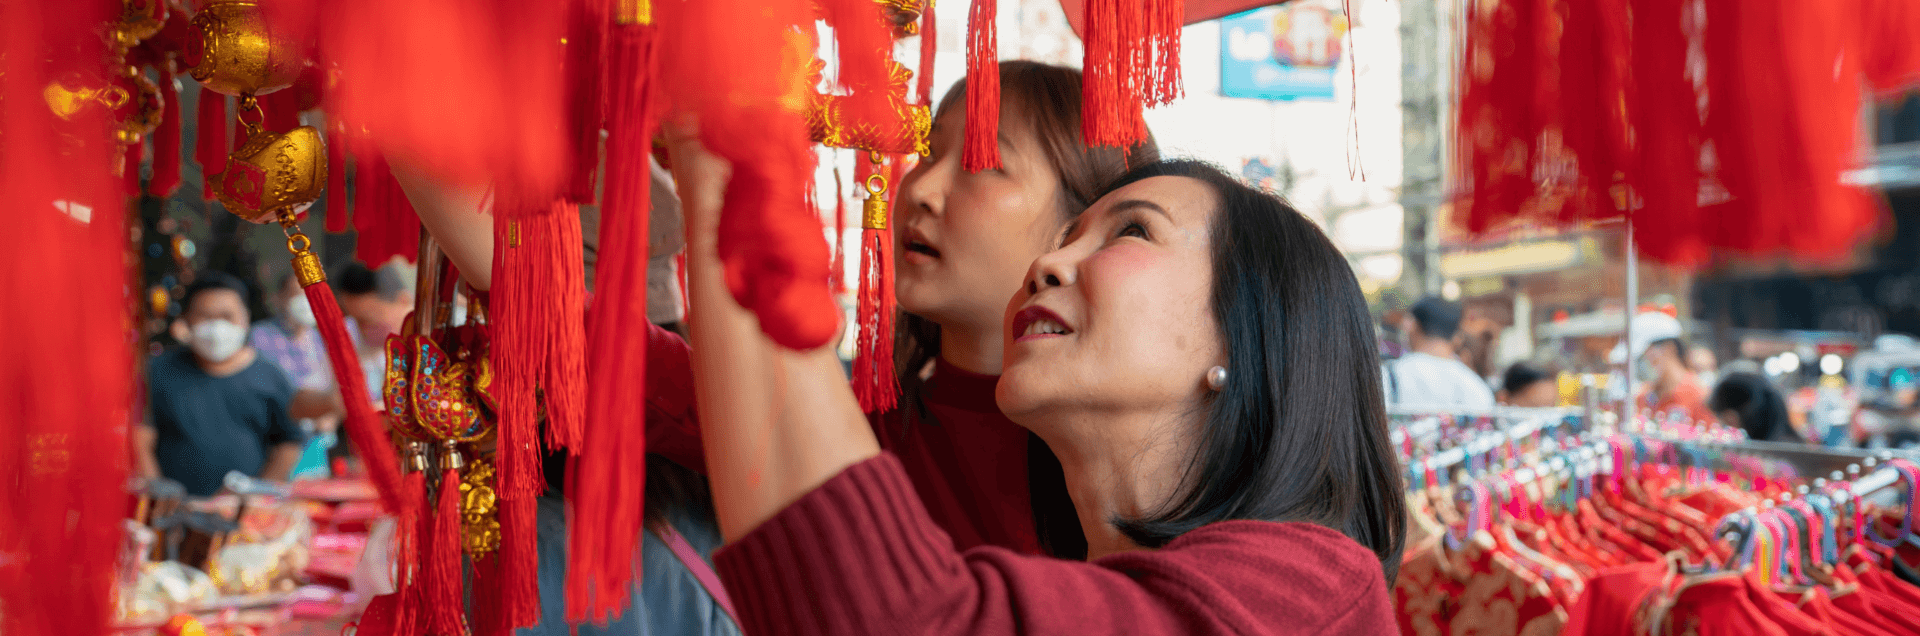 Celebrating Chinese Lunar New Year and Incorporating TCM - woman looking at red lanterns and Chinese new year decorations